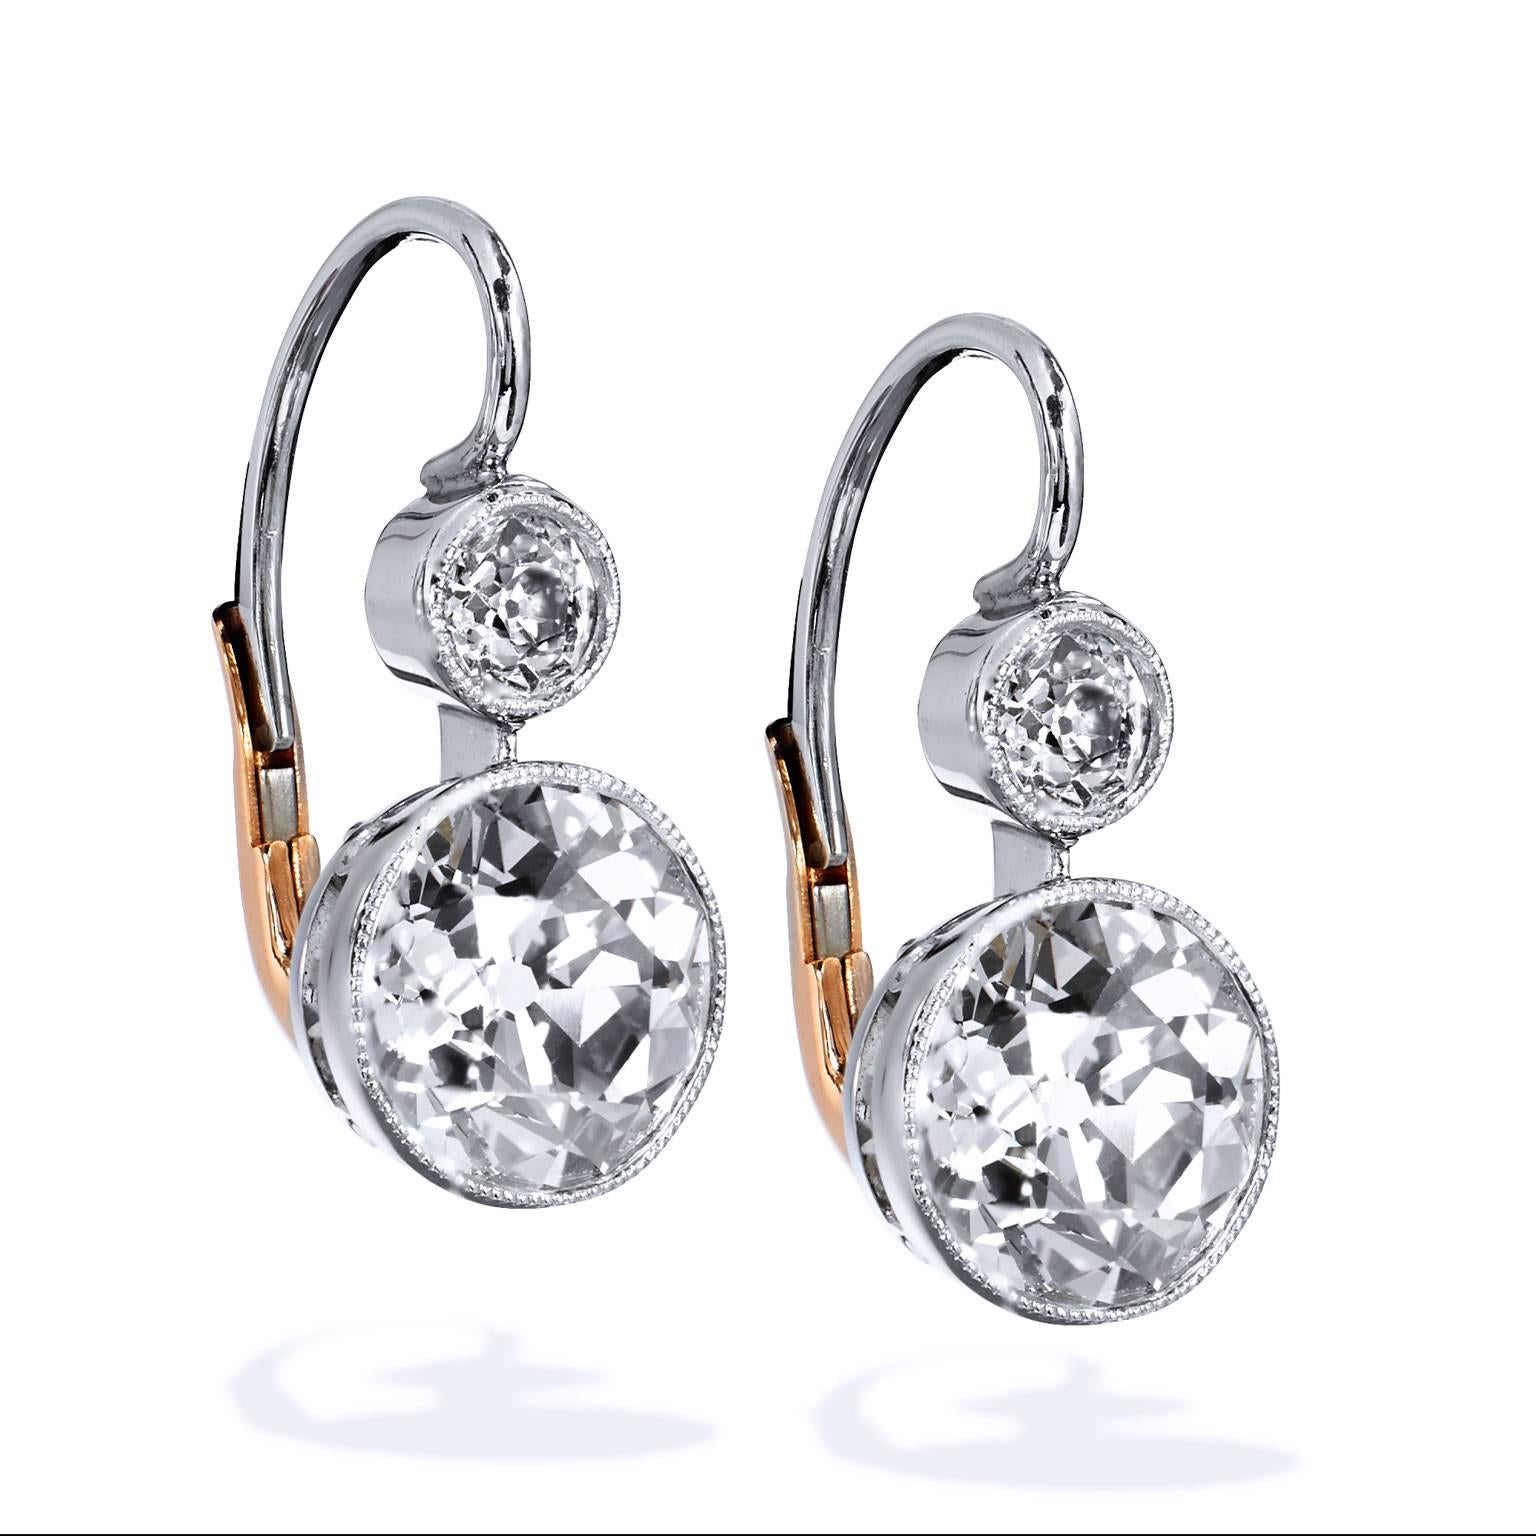 The hardness and strength of diamond and platinum merge with the warmth and softness of 18 karat rose gold to create a pair of eye-catching lever-back earrings. Two pieces of Old European cut diamonds, with a total weight of 6.17 carat (3.15 cart